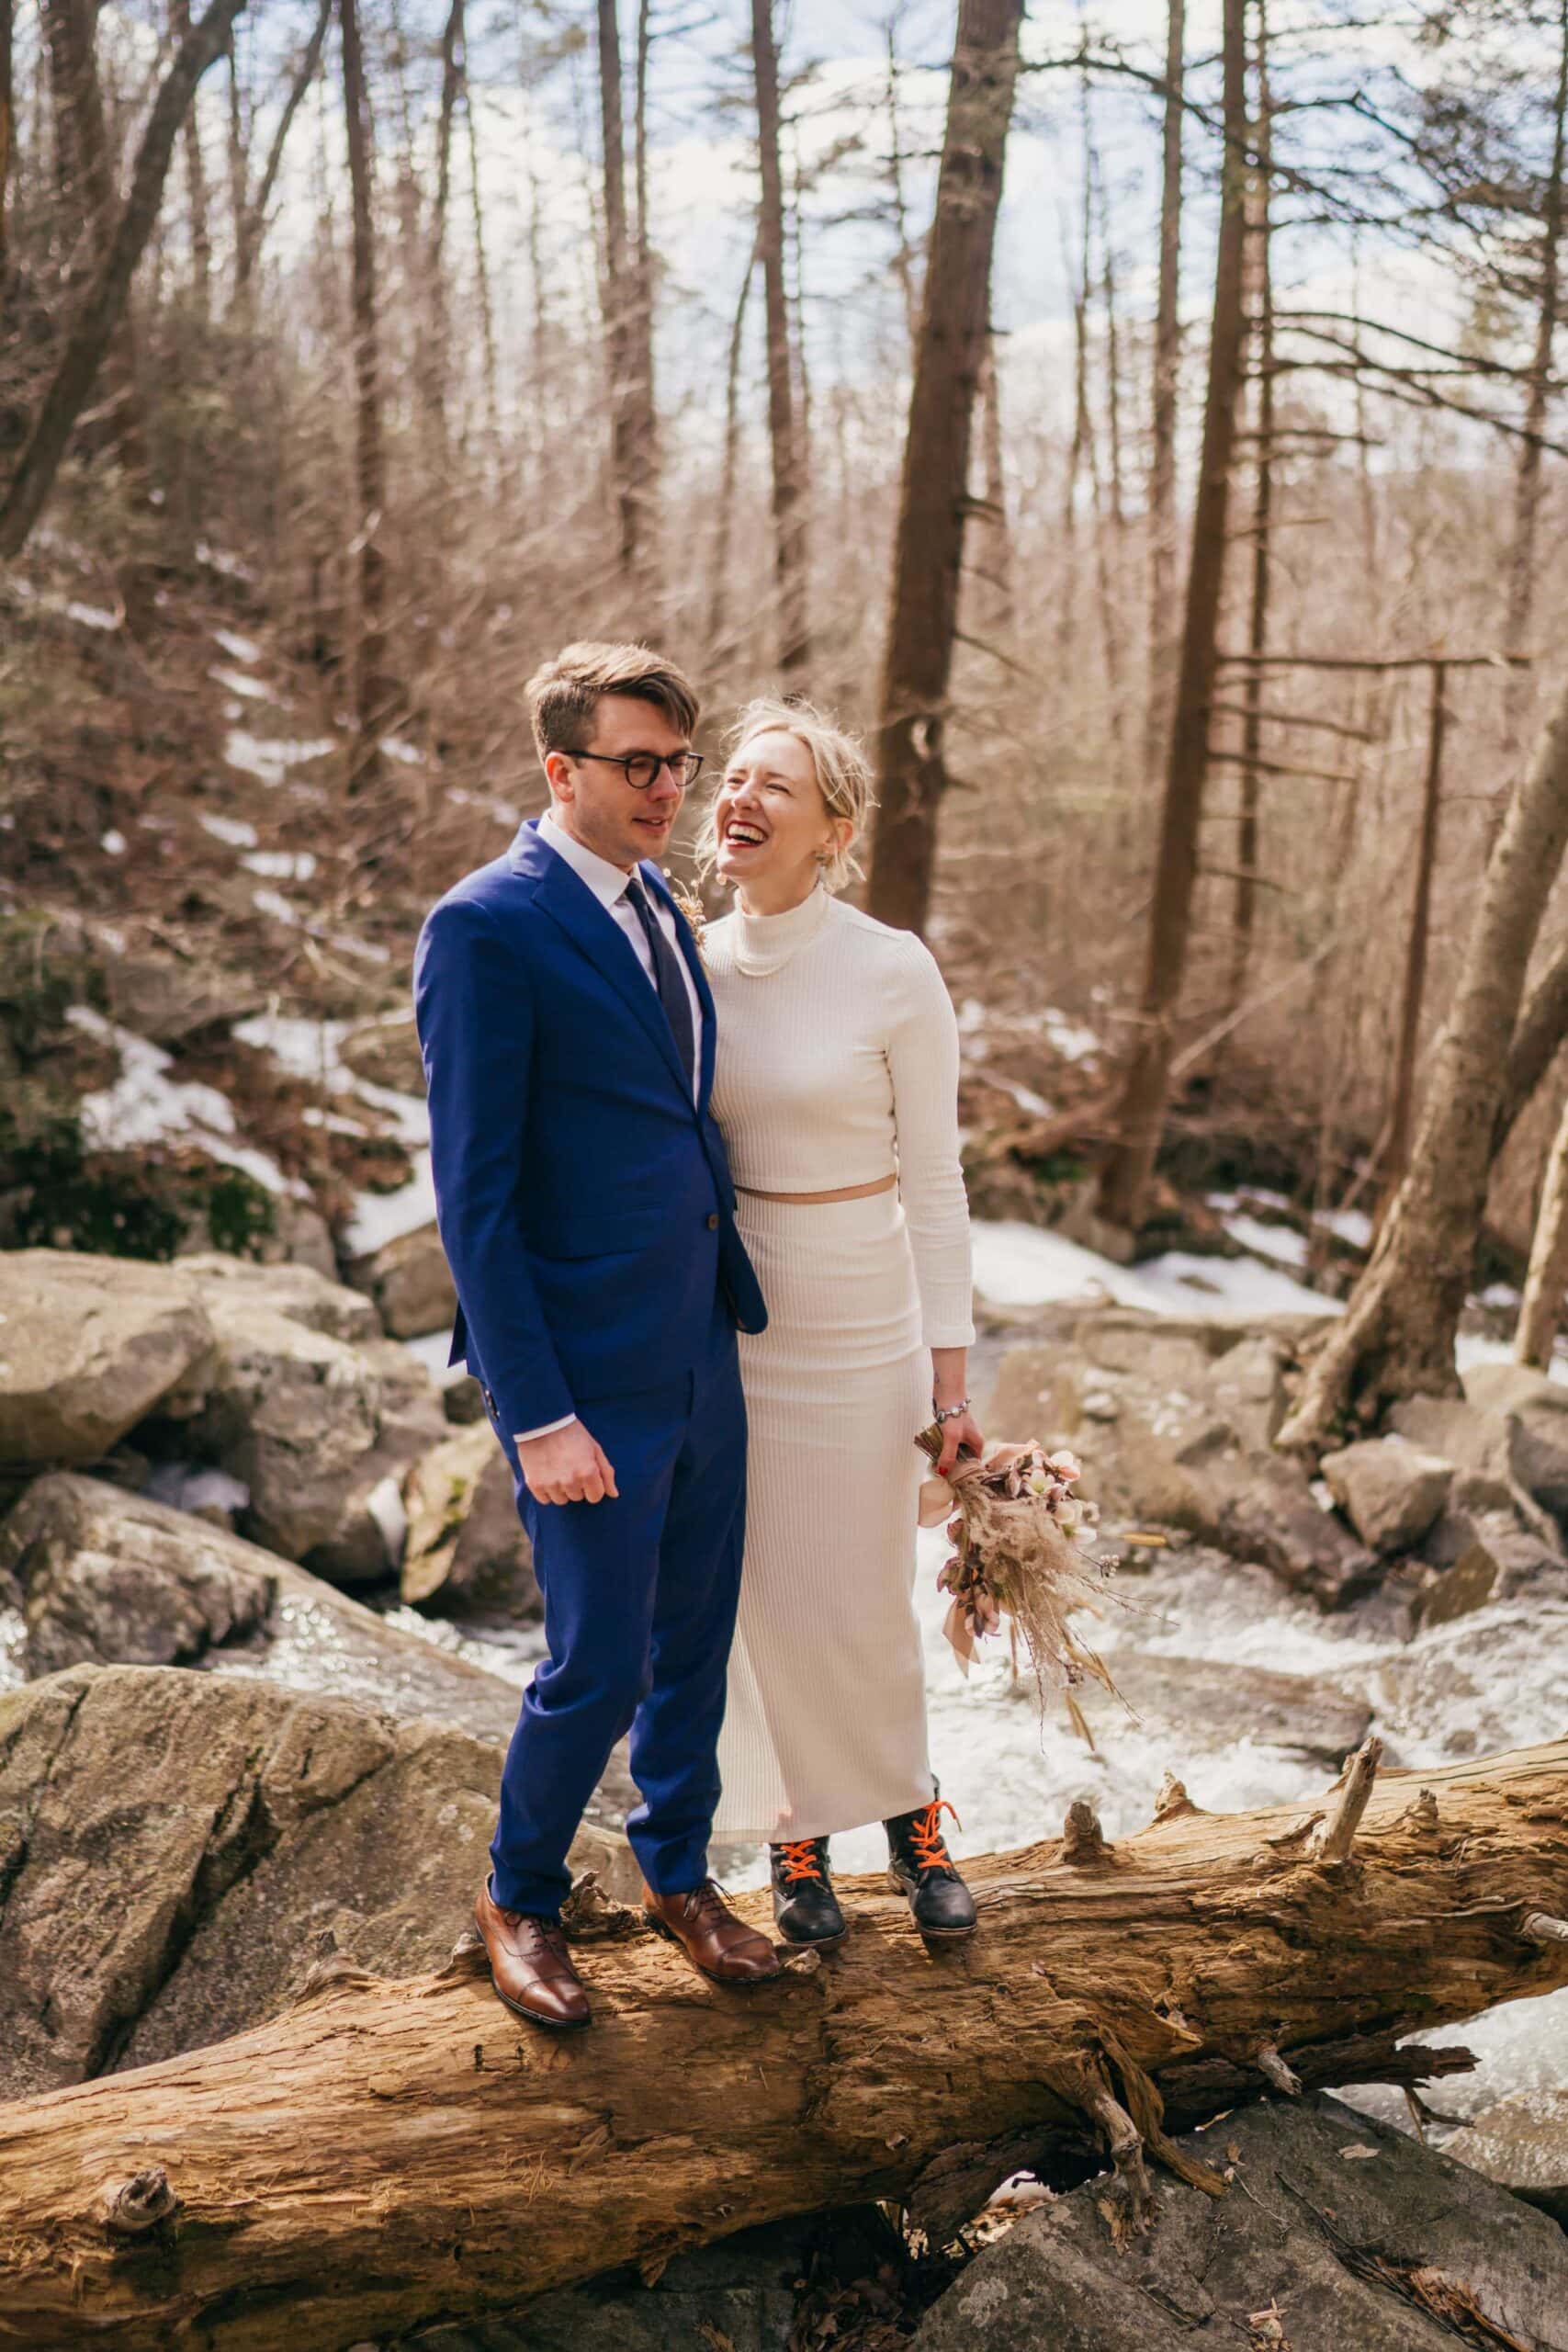 Bride in dress laughs at groom in blue suit as they stand on a log over a river in winter Hudson Valley forest.